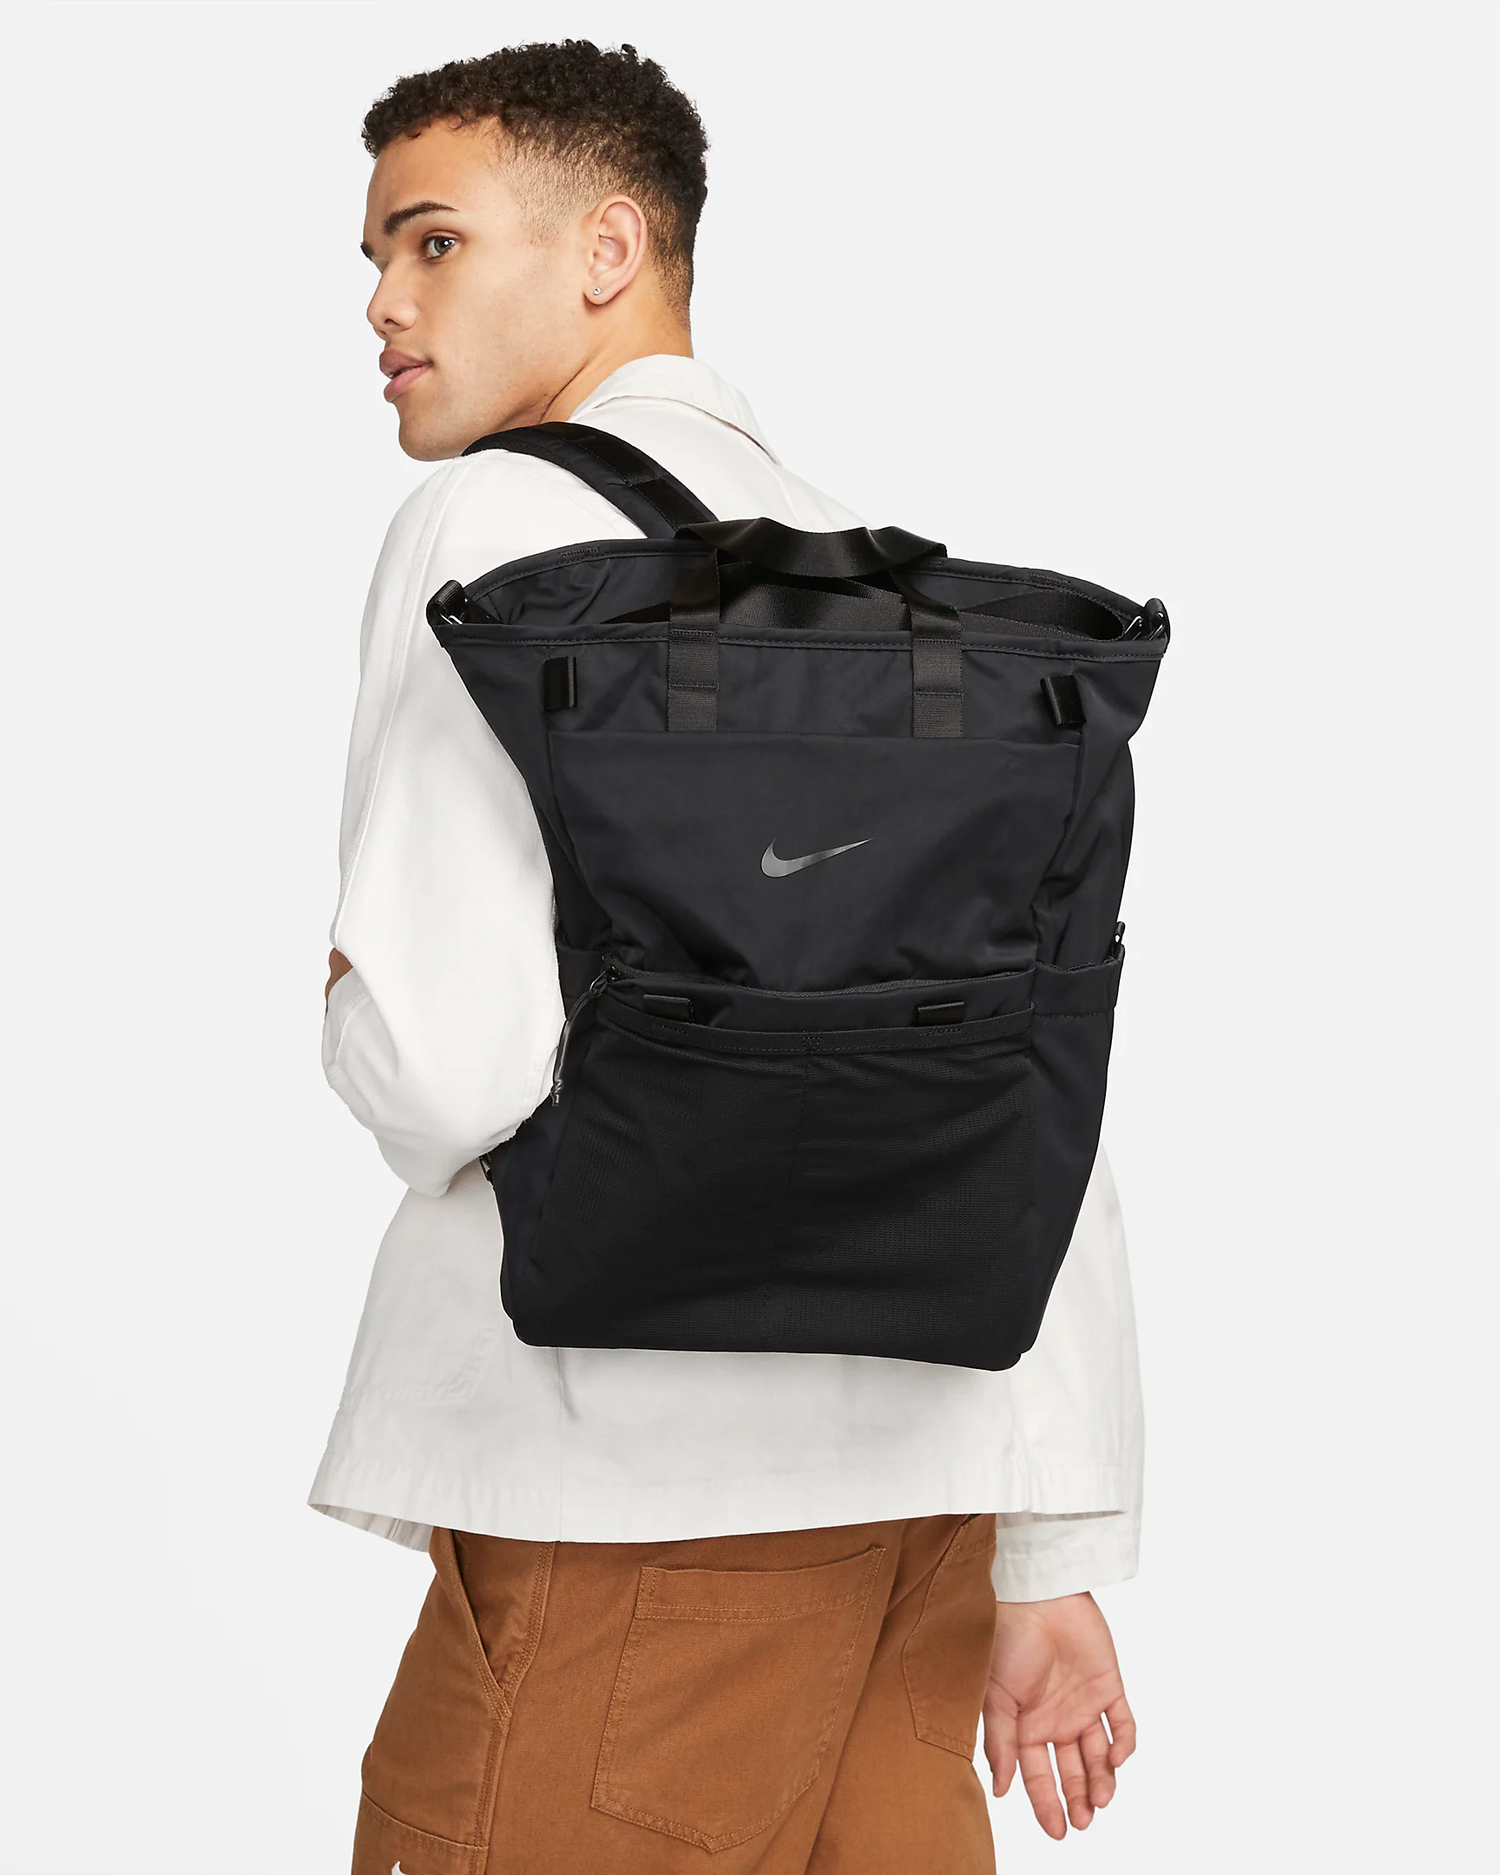 Now Available: Nike Maternity Diaper Backpack 